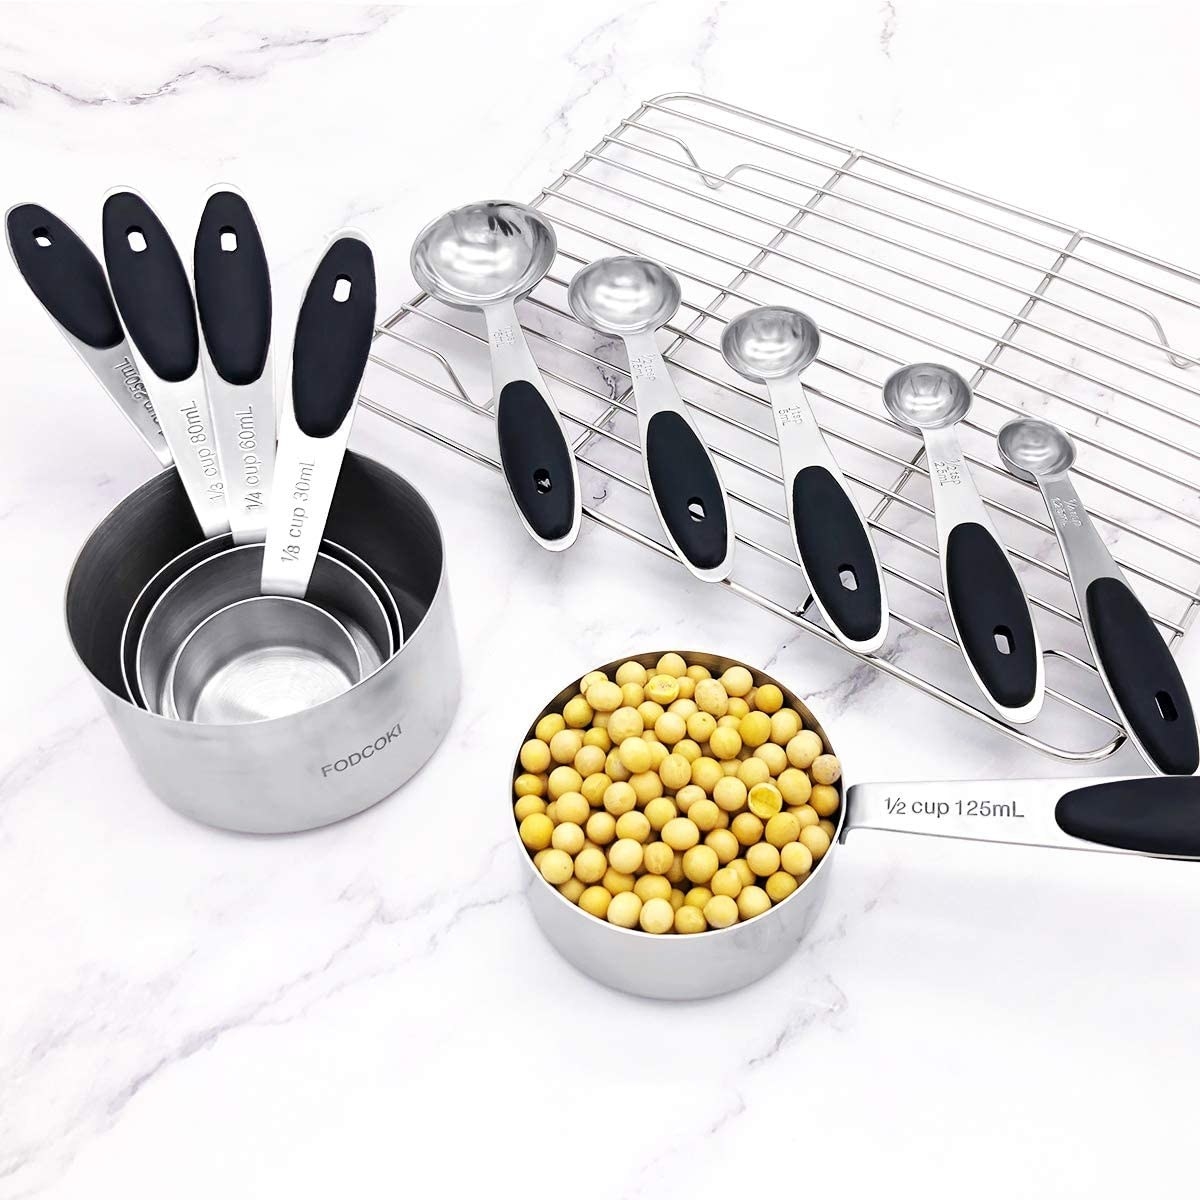 the set of 12 Kitchen Measuring Cups and Spoons on a kitchen counter